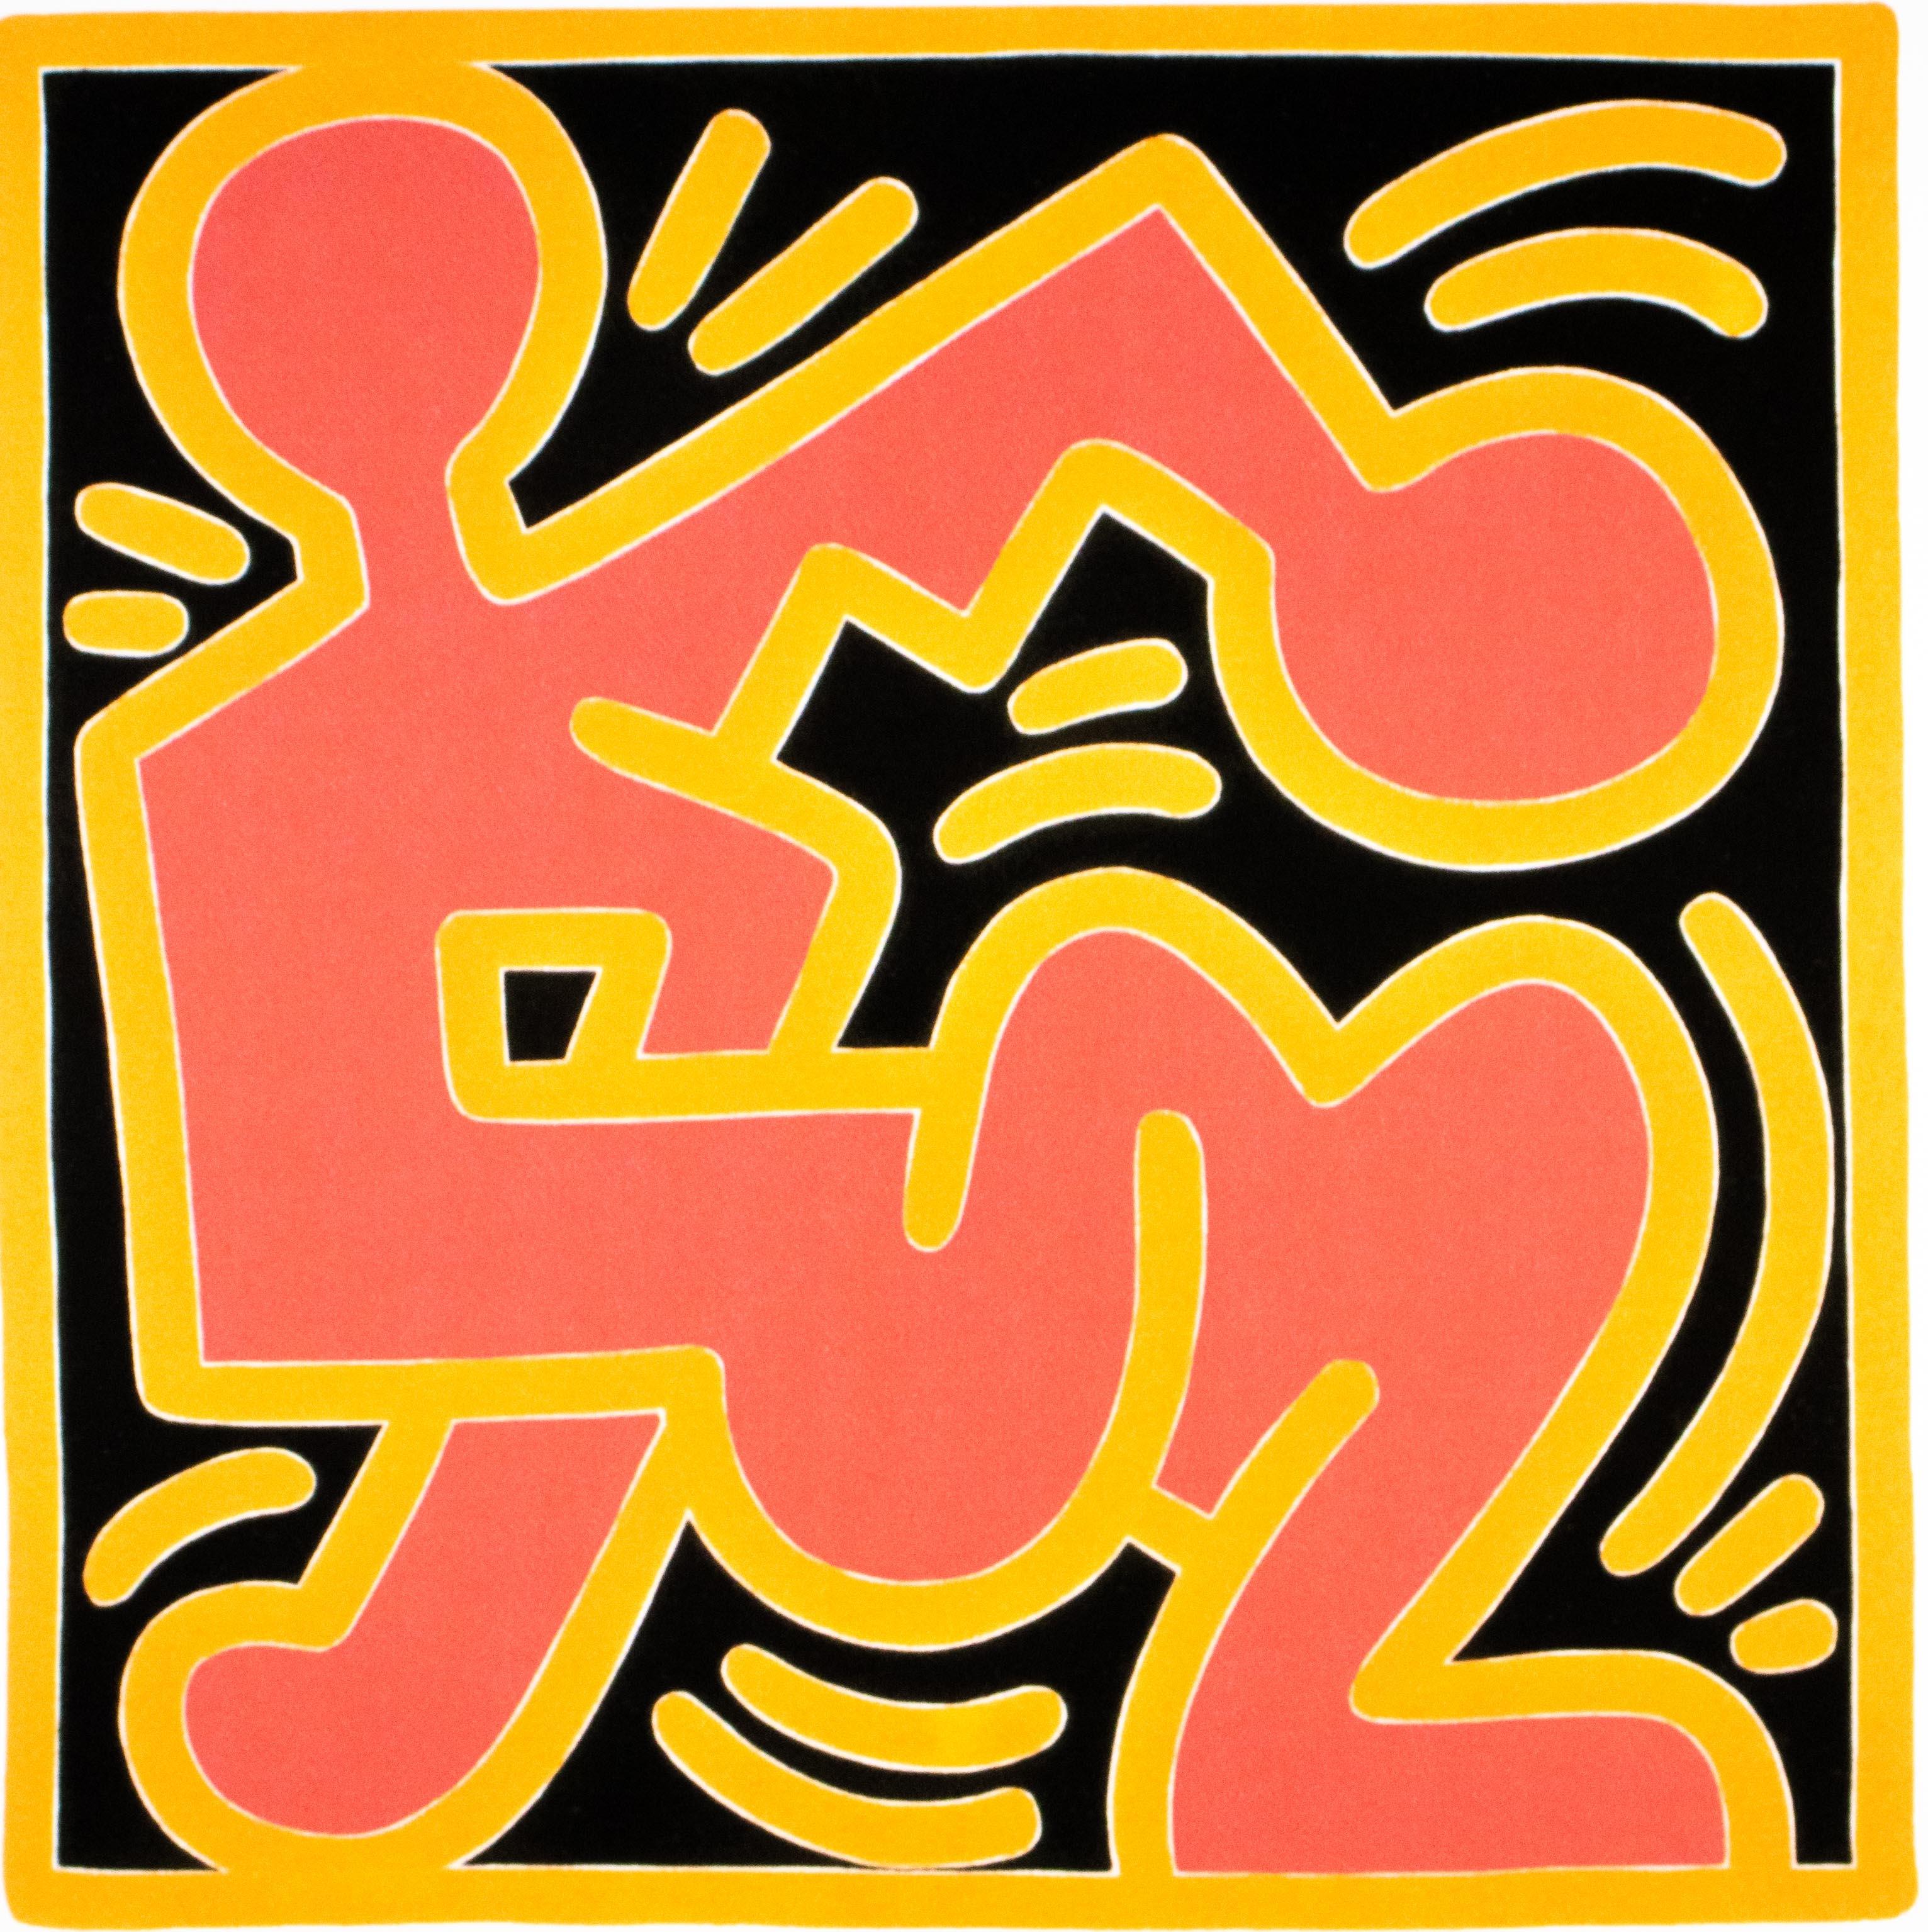 Lithographie – limitierte Auflage 15/150 Exemplare – Keith Haring Foundation Inc.